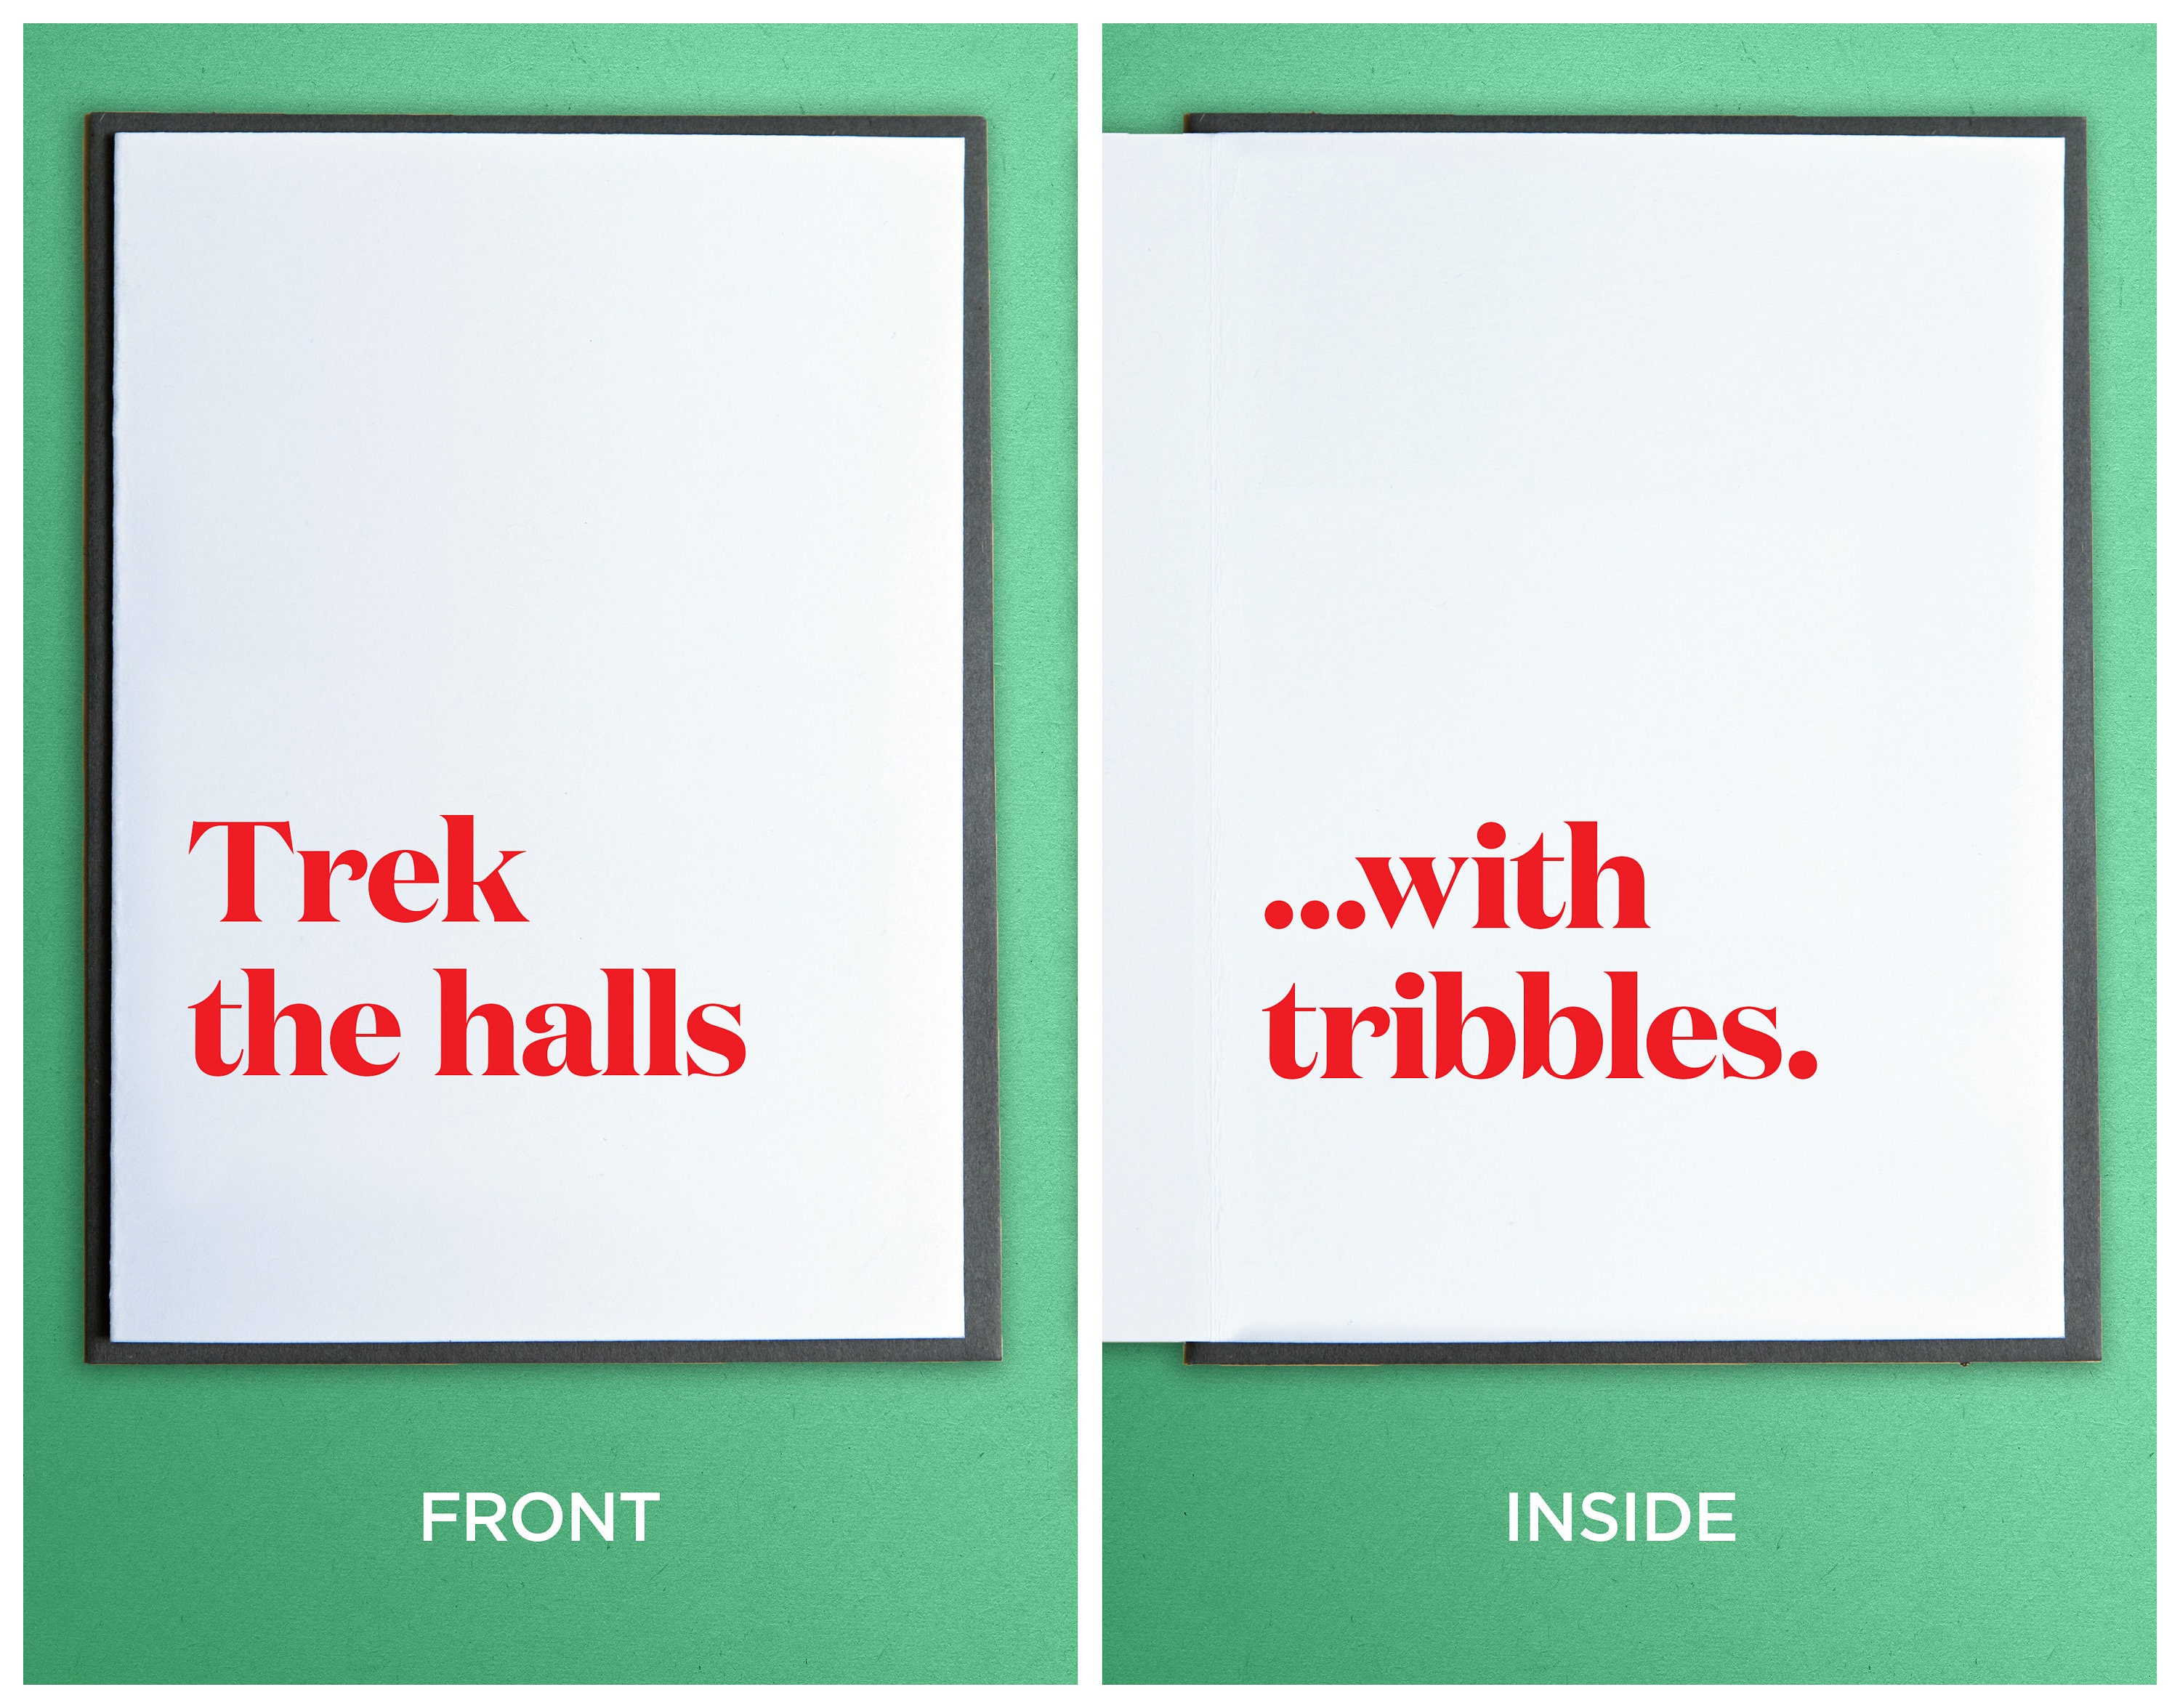 106 Cool Star Trek Gift Ideas to Gift Strong and Prosper